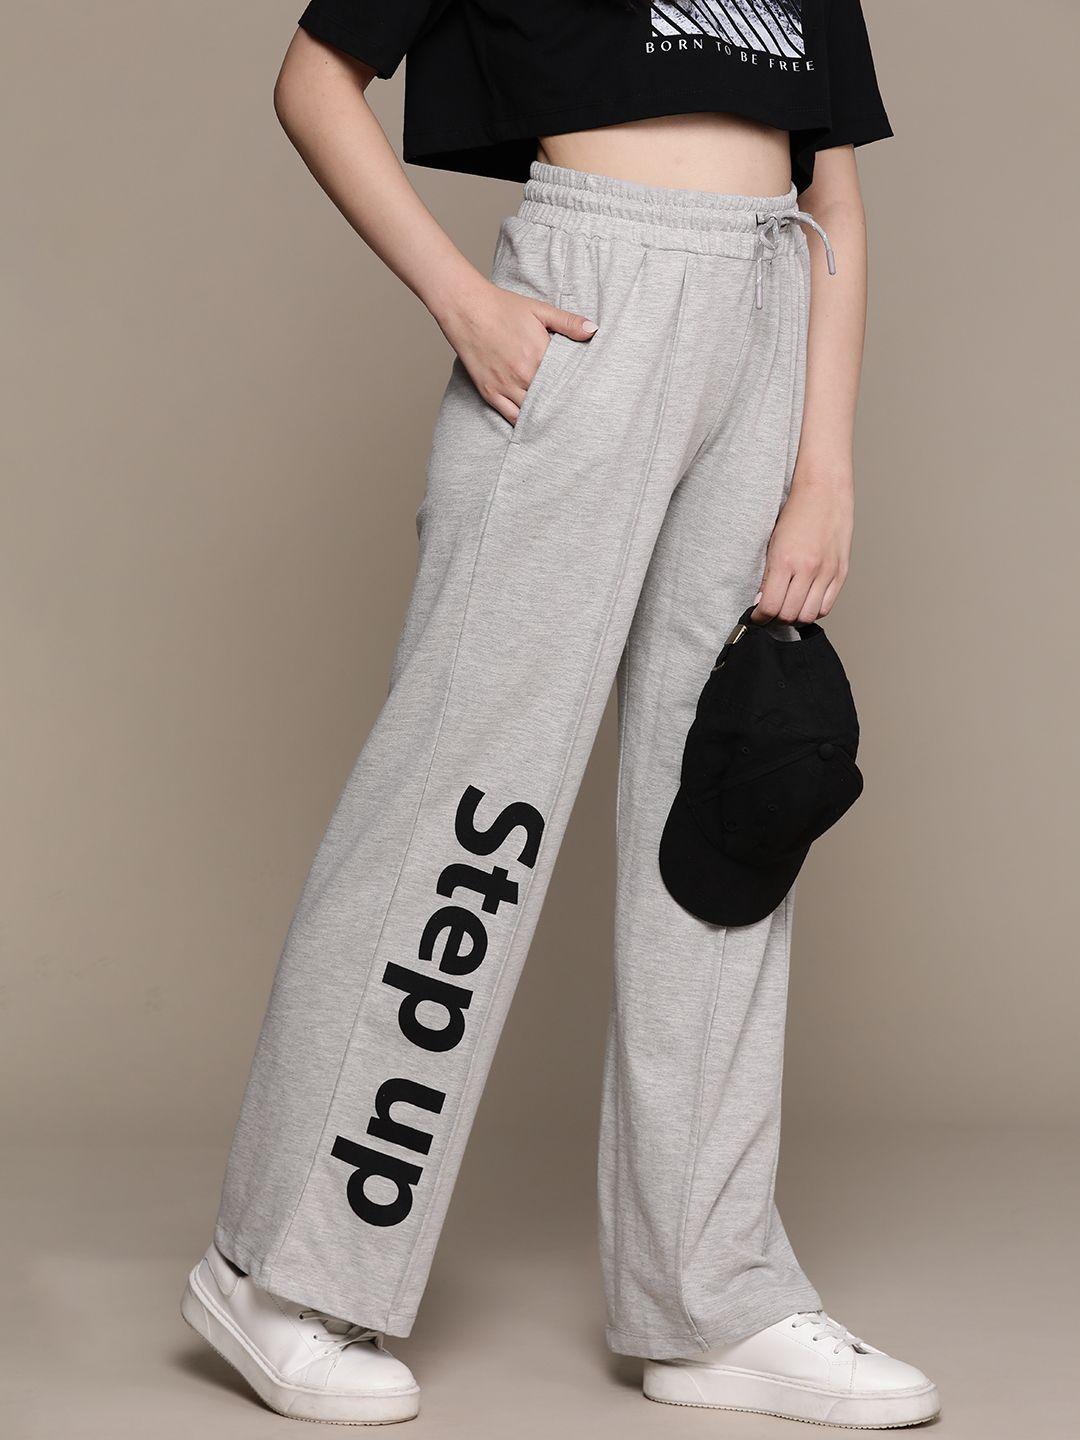 the roadster lifestyle co. women wide leg printed track pants